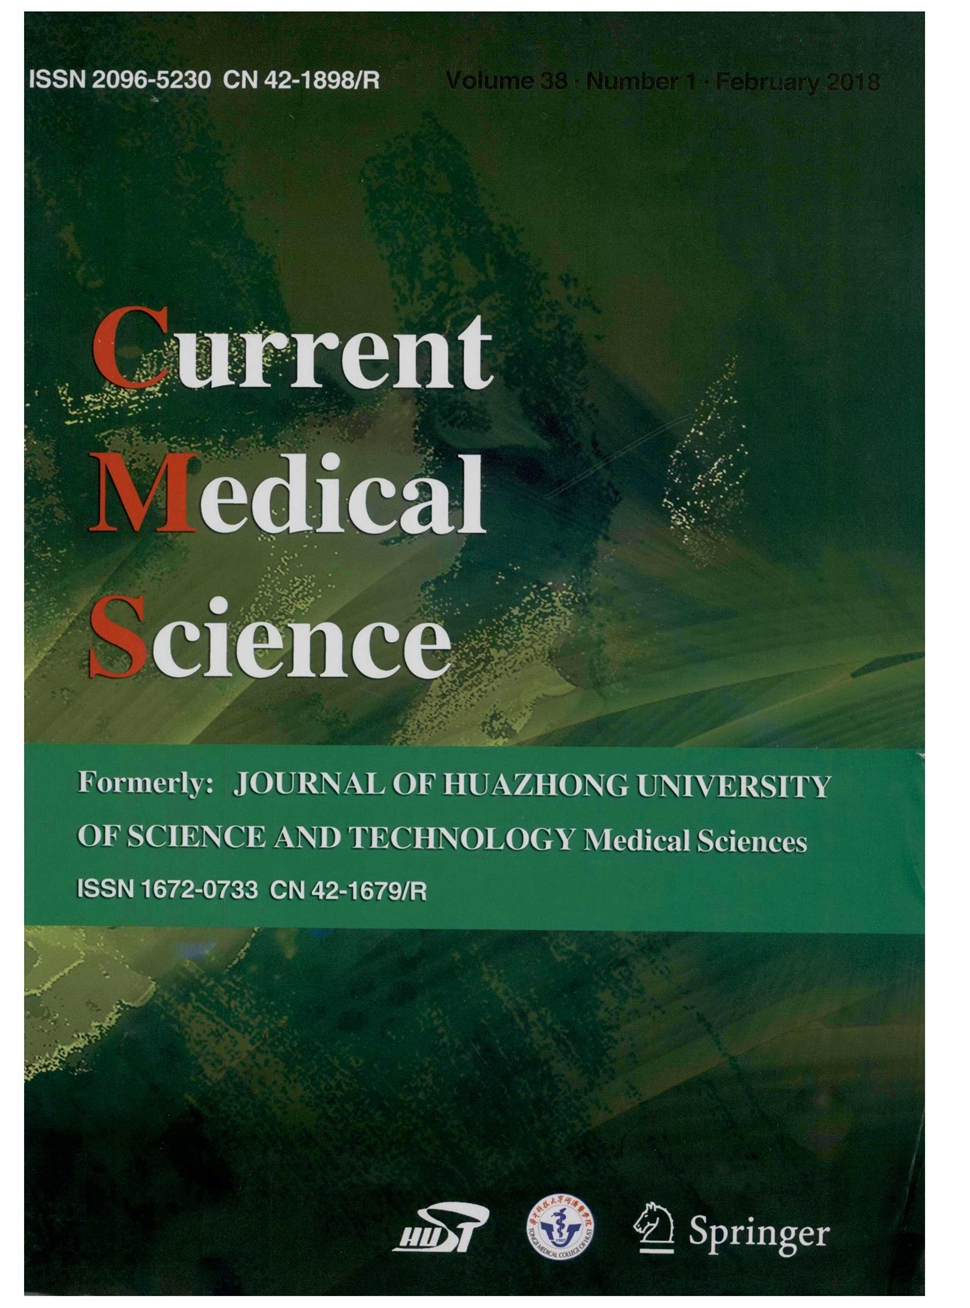 Journal of Huazhong University of Science and Technology杂志